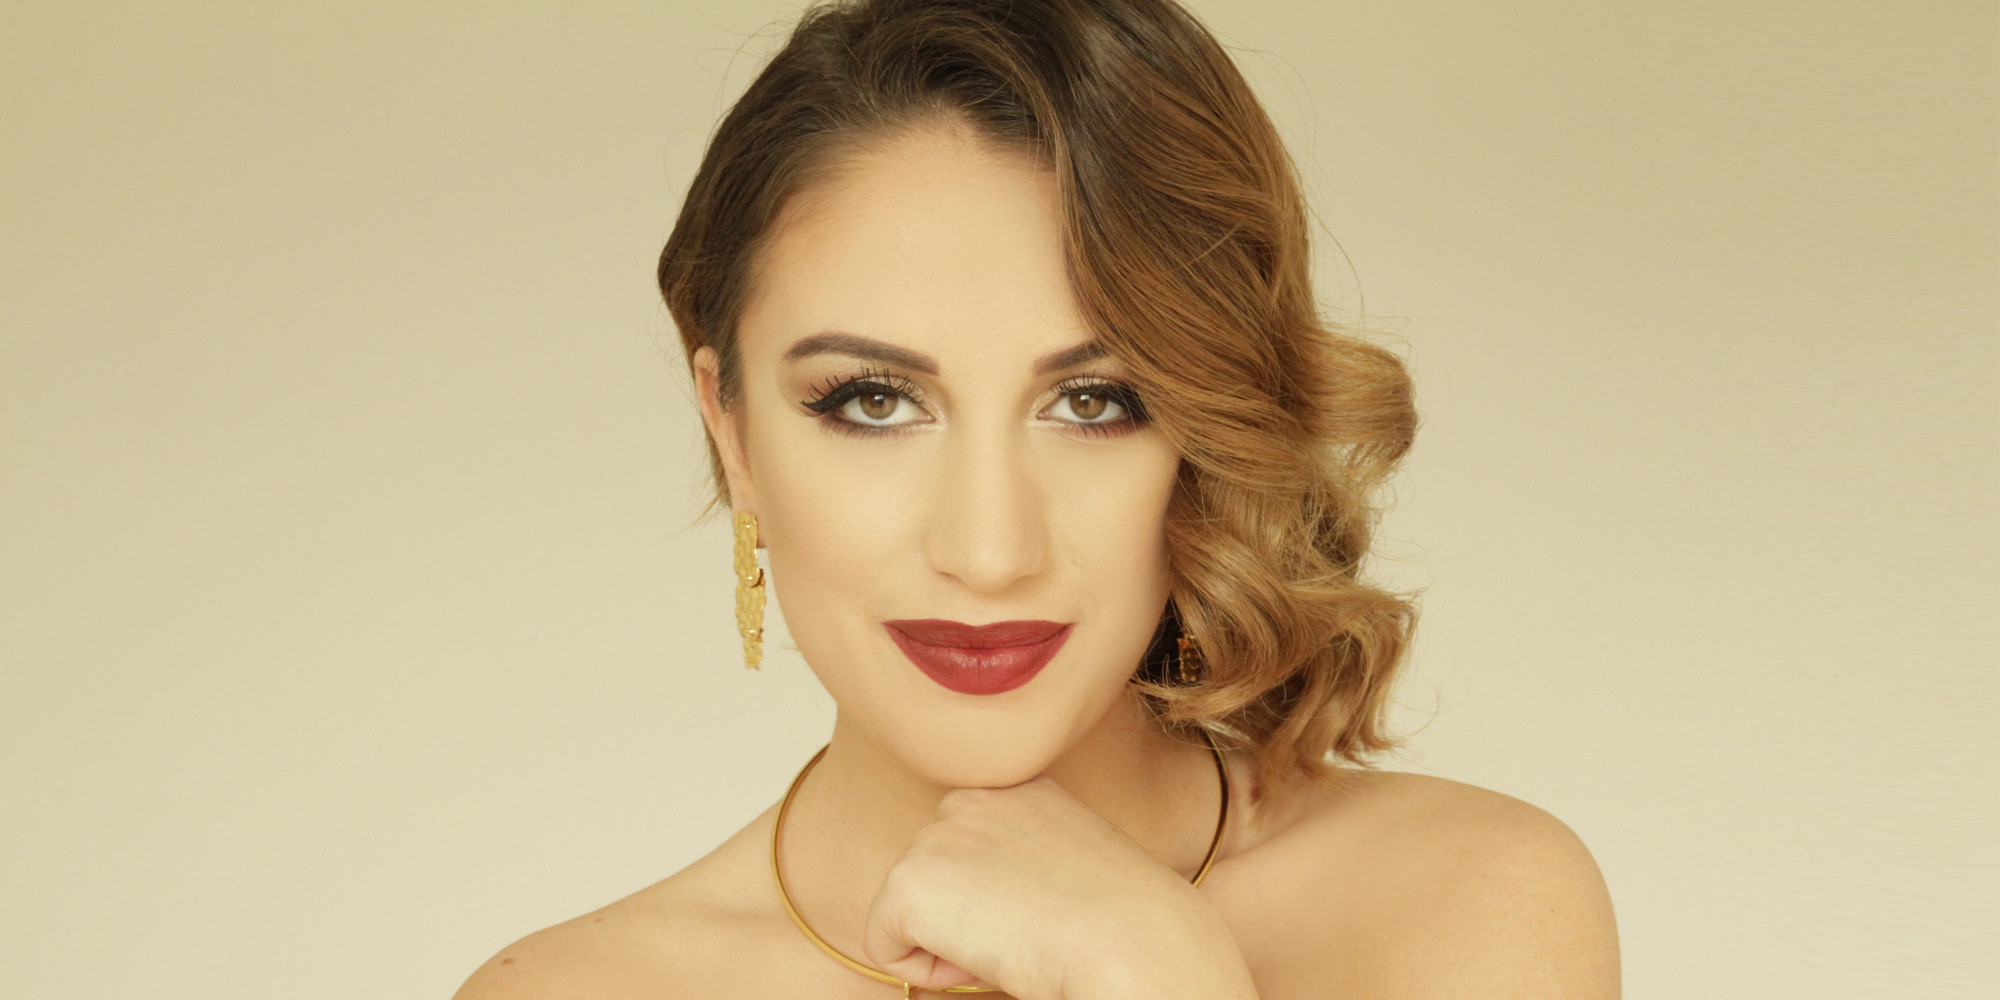 Elhaida Dani: “When “Diell” withdrew I thought that the possibility for me to sing on the Eurovision stage was over” (Albania 2015 – Exclusive Interview)